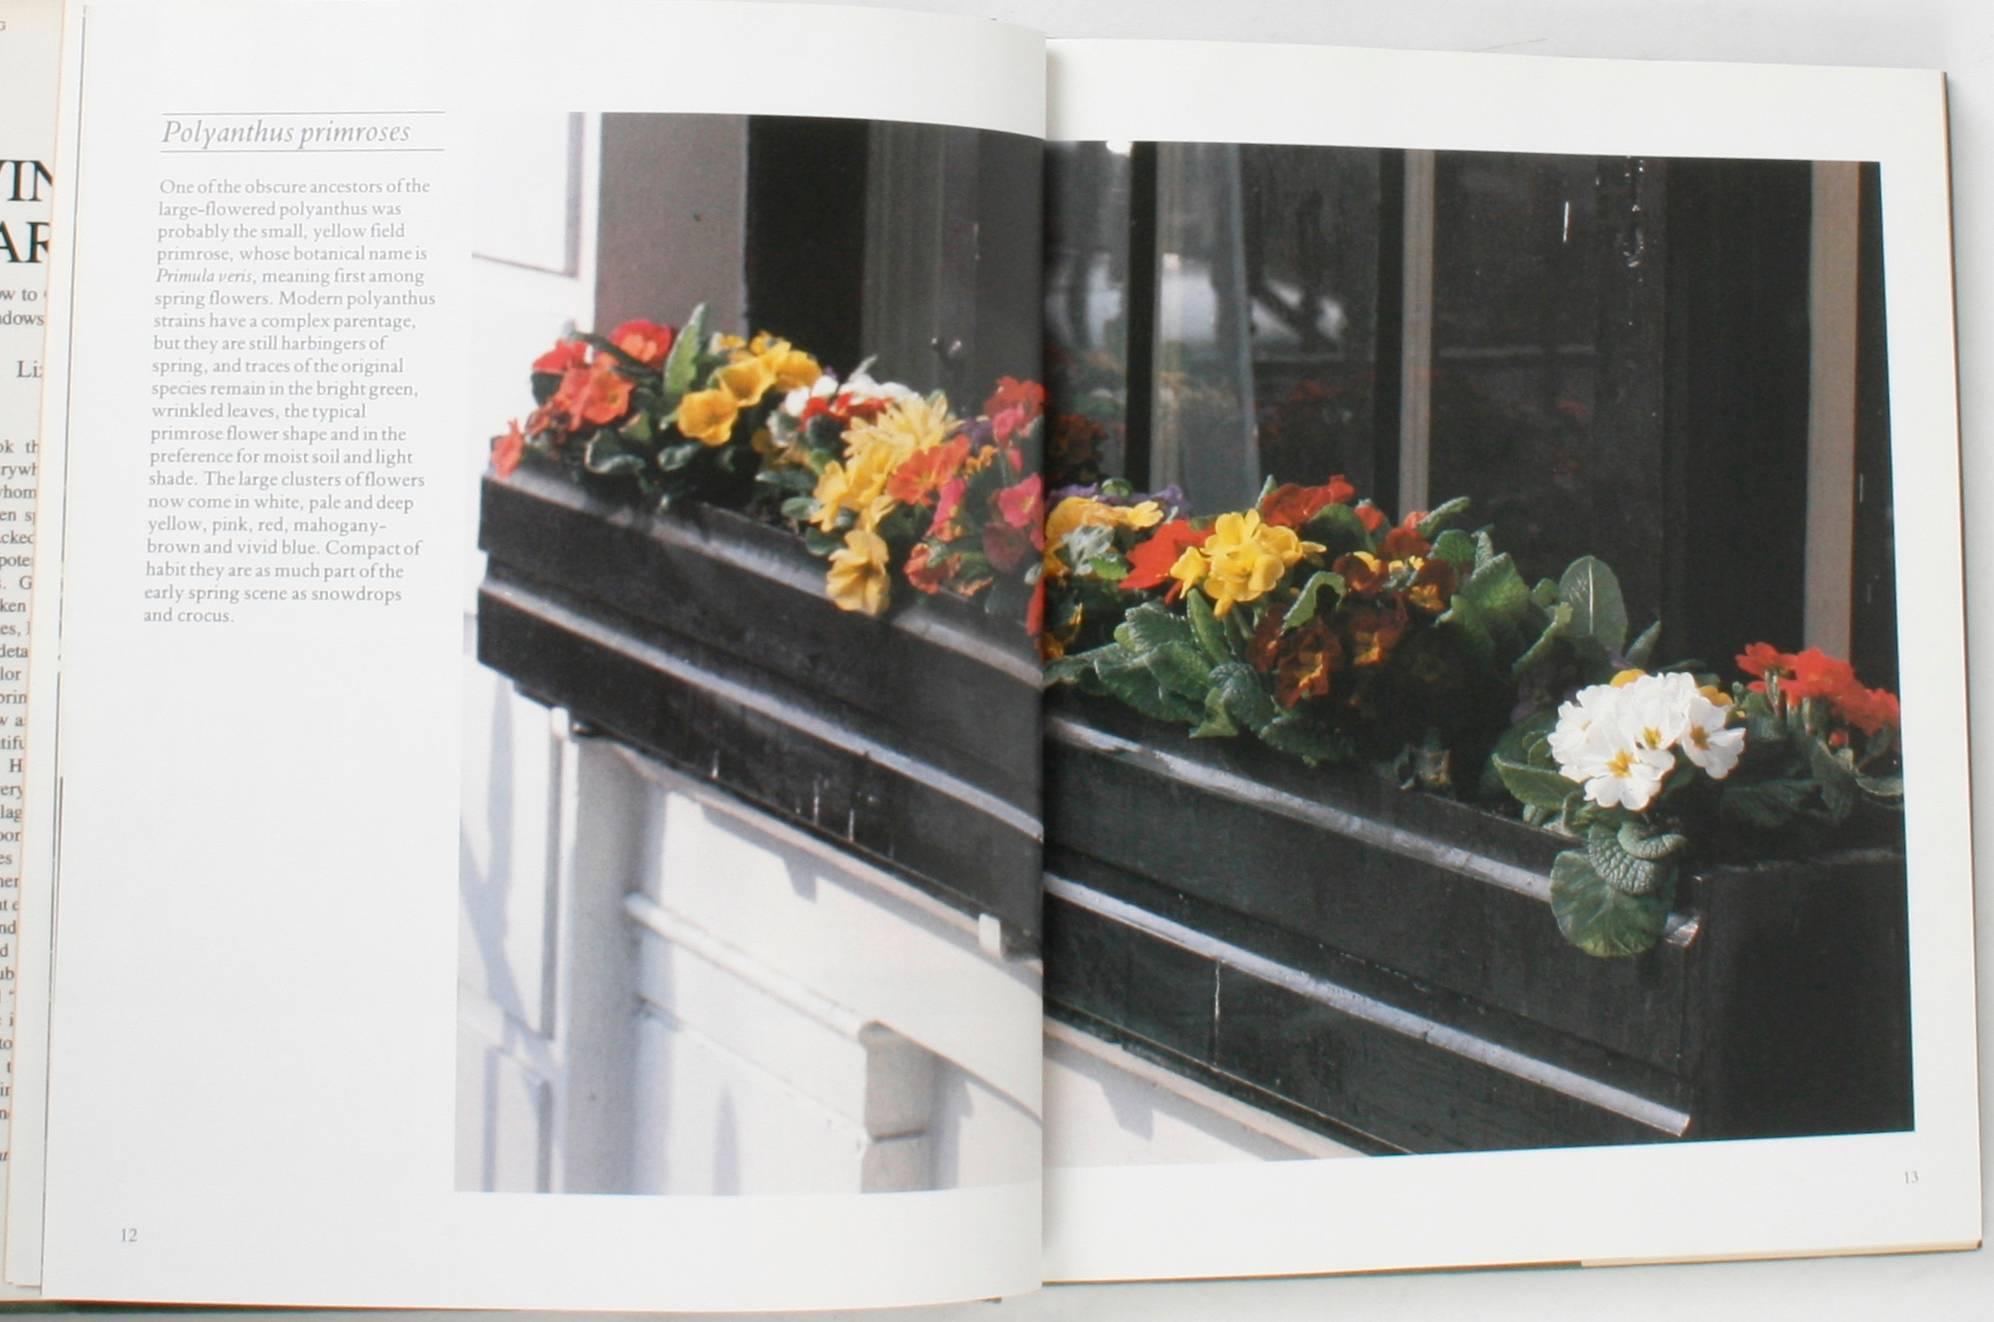 Window Gardens: How to Create Beautiful Windows Indoors and Out, by Lizzie Boyd. New York: Clarkson N. Potter, Inc. Publishers, 1985. Stated first American edition hard cover with dust jacket. 144 pp. A book on how to create beautiful window